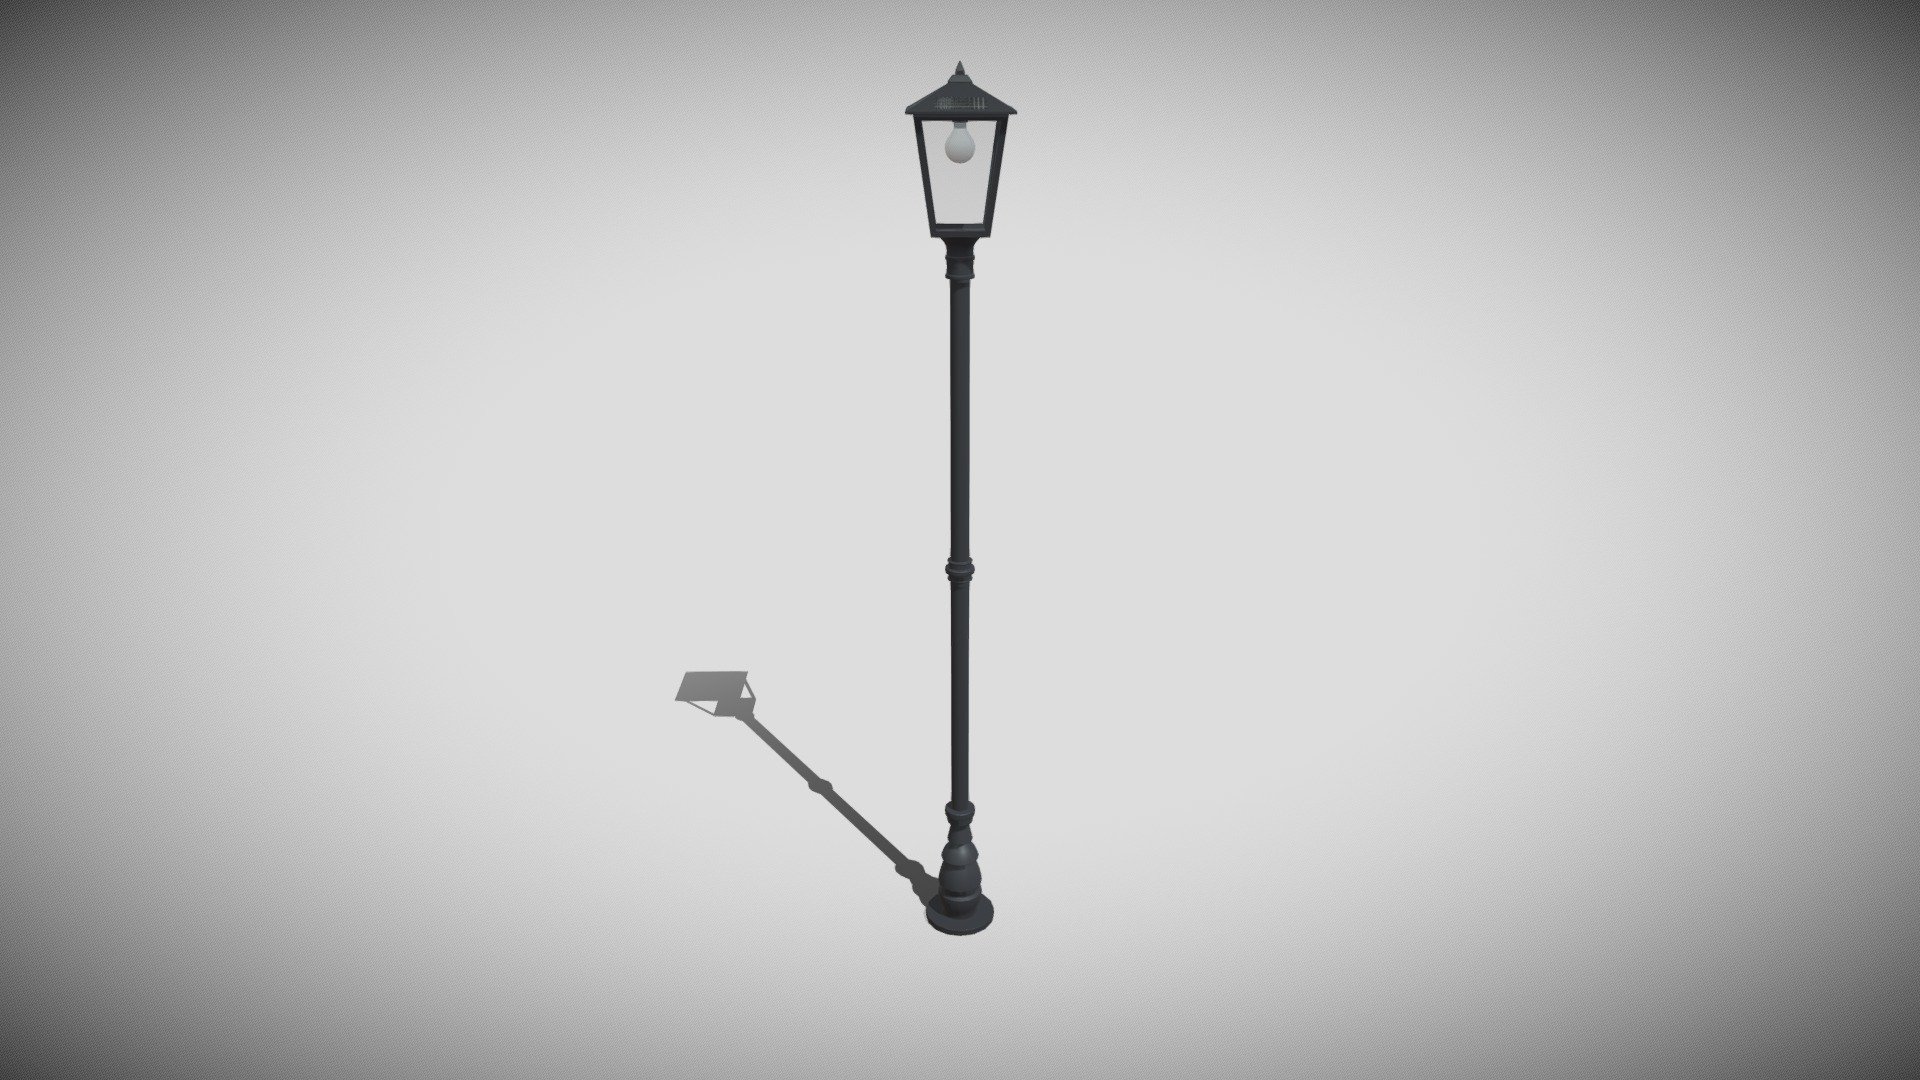 Detailed model of a Vintage Design Street Lamp, modeled in Cinema 4D.The model was created using approximate real world dimensions.

The model has 2,897 polys and 2,876 vertices.

An additional file has been provided containing the original Cinema 4D project files, textures and other 3d export files such as 3ds, fbx and obj 3d model